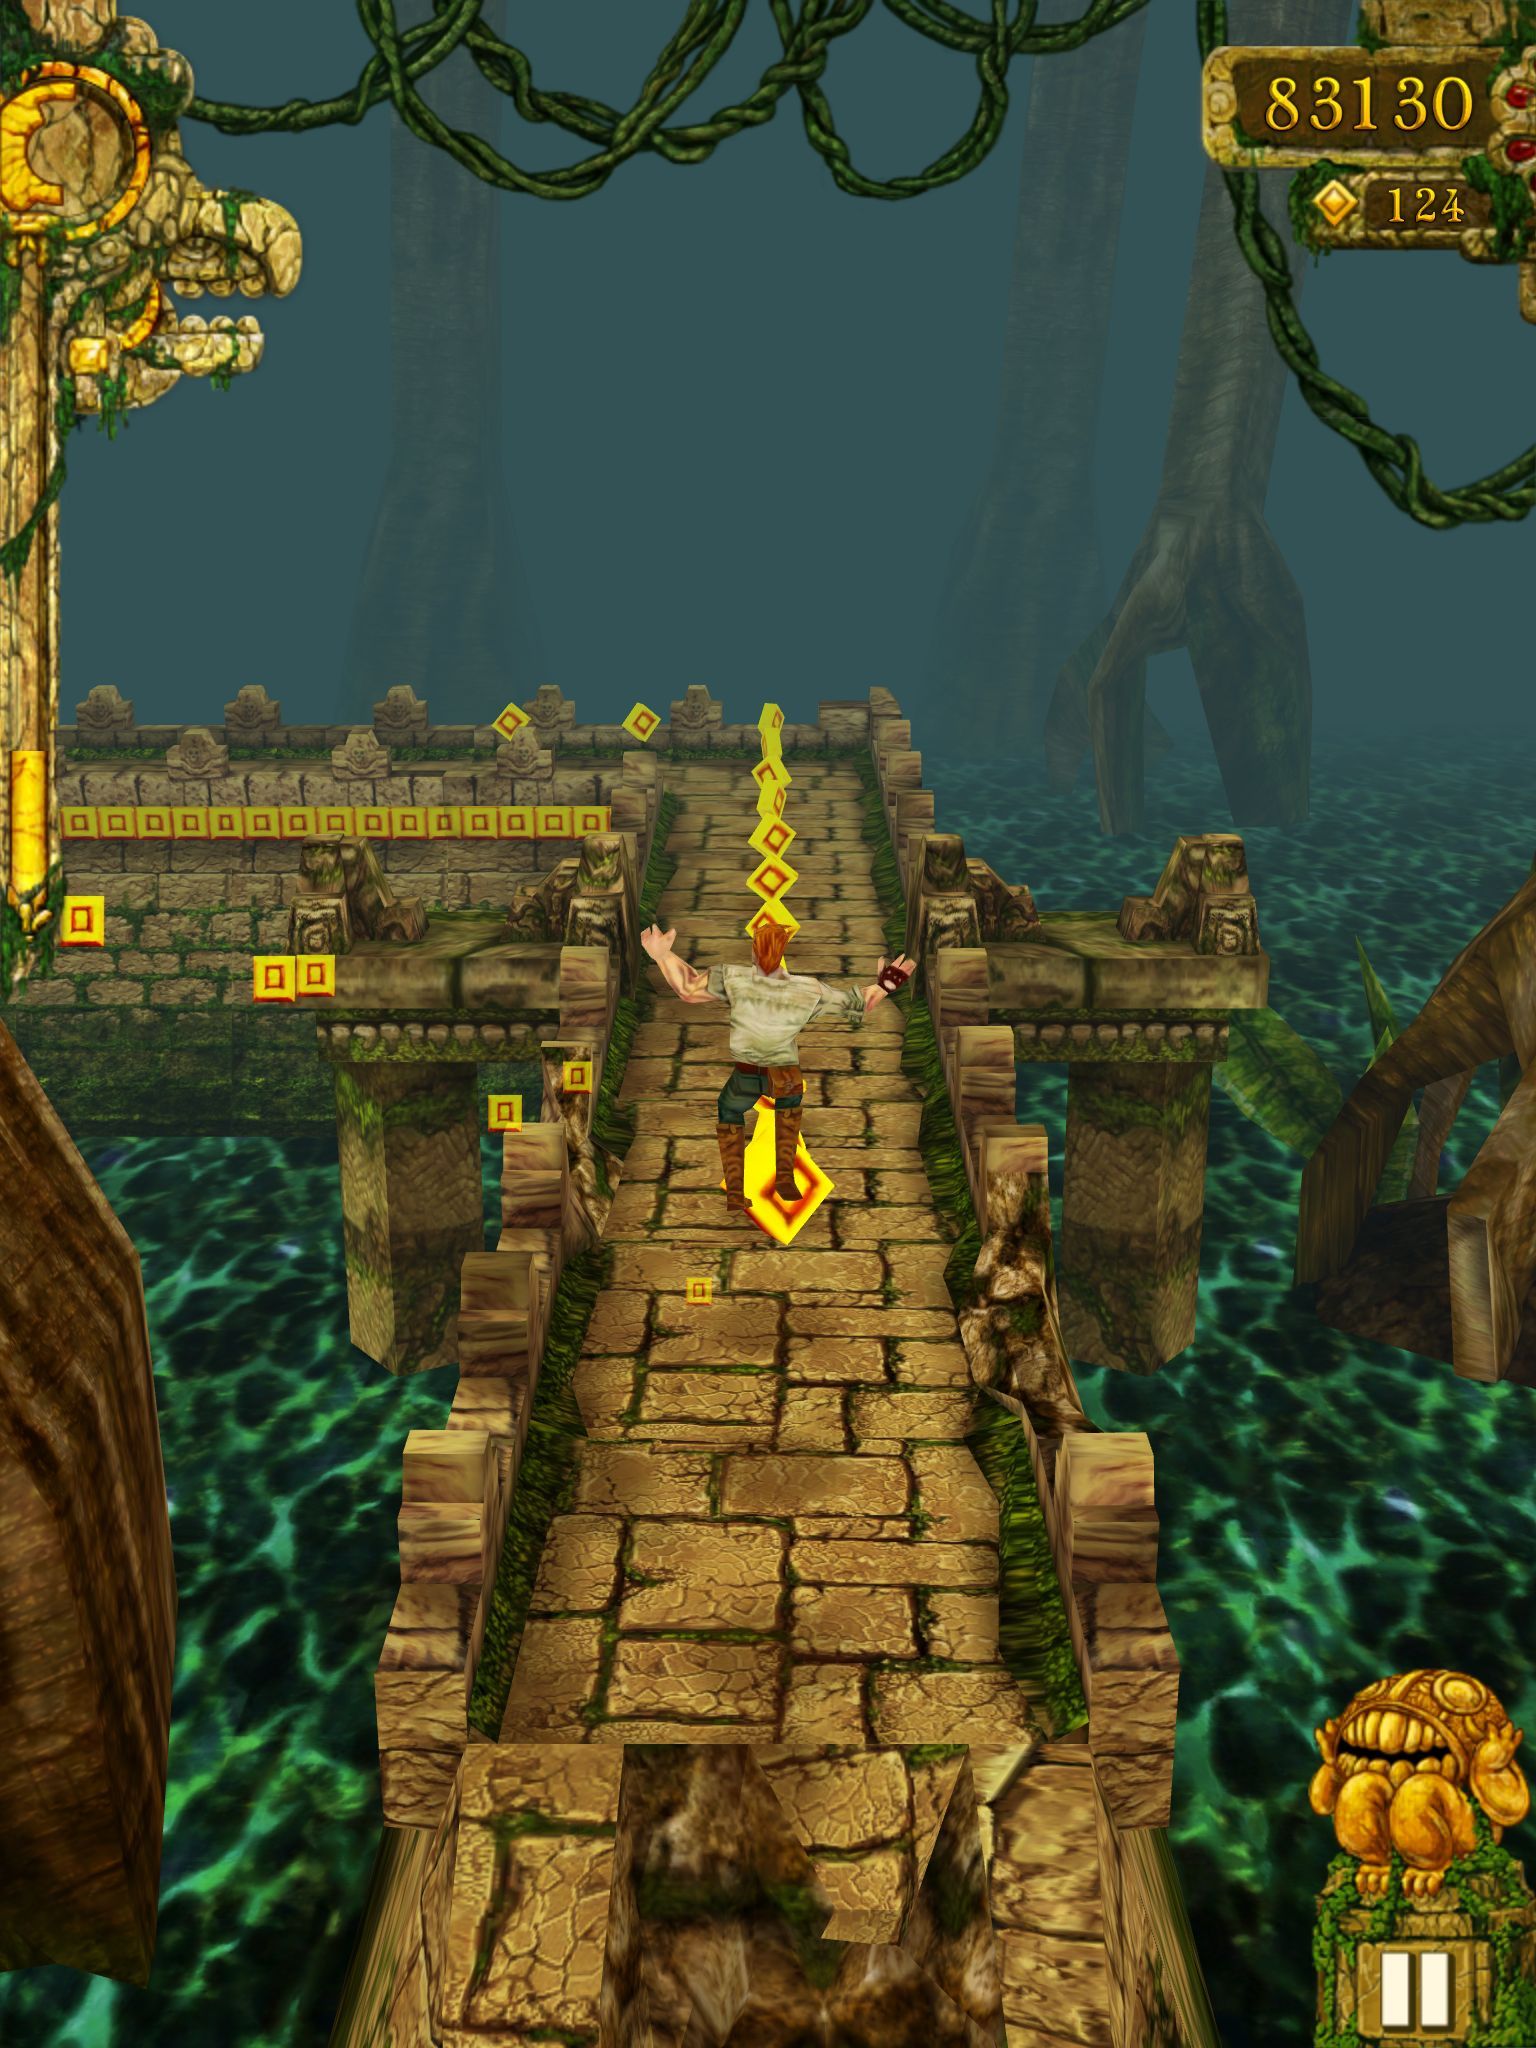 Download game for temple run - Temple run - download and play free ...